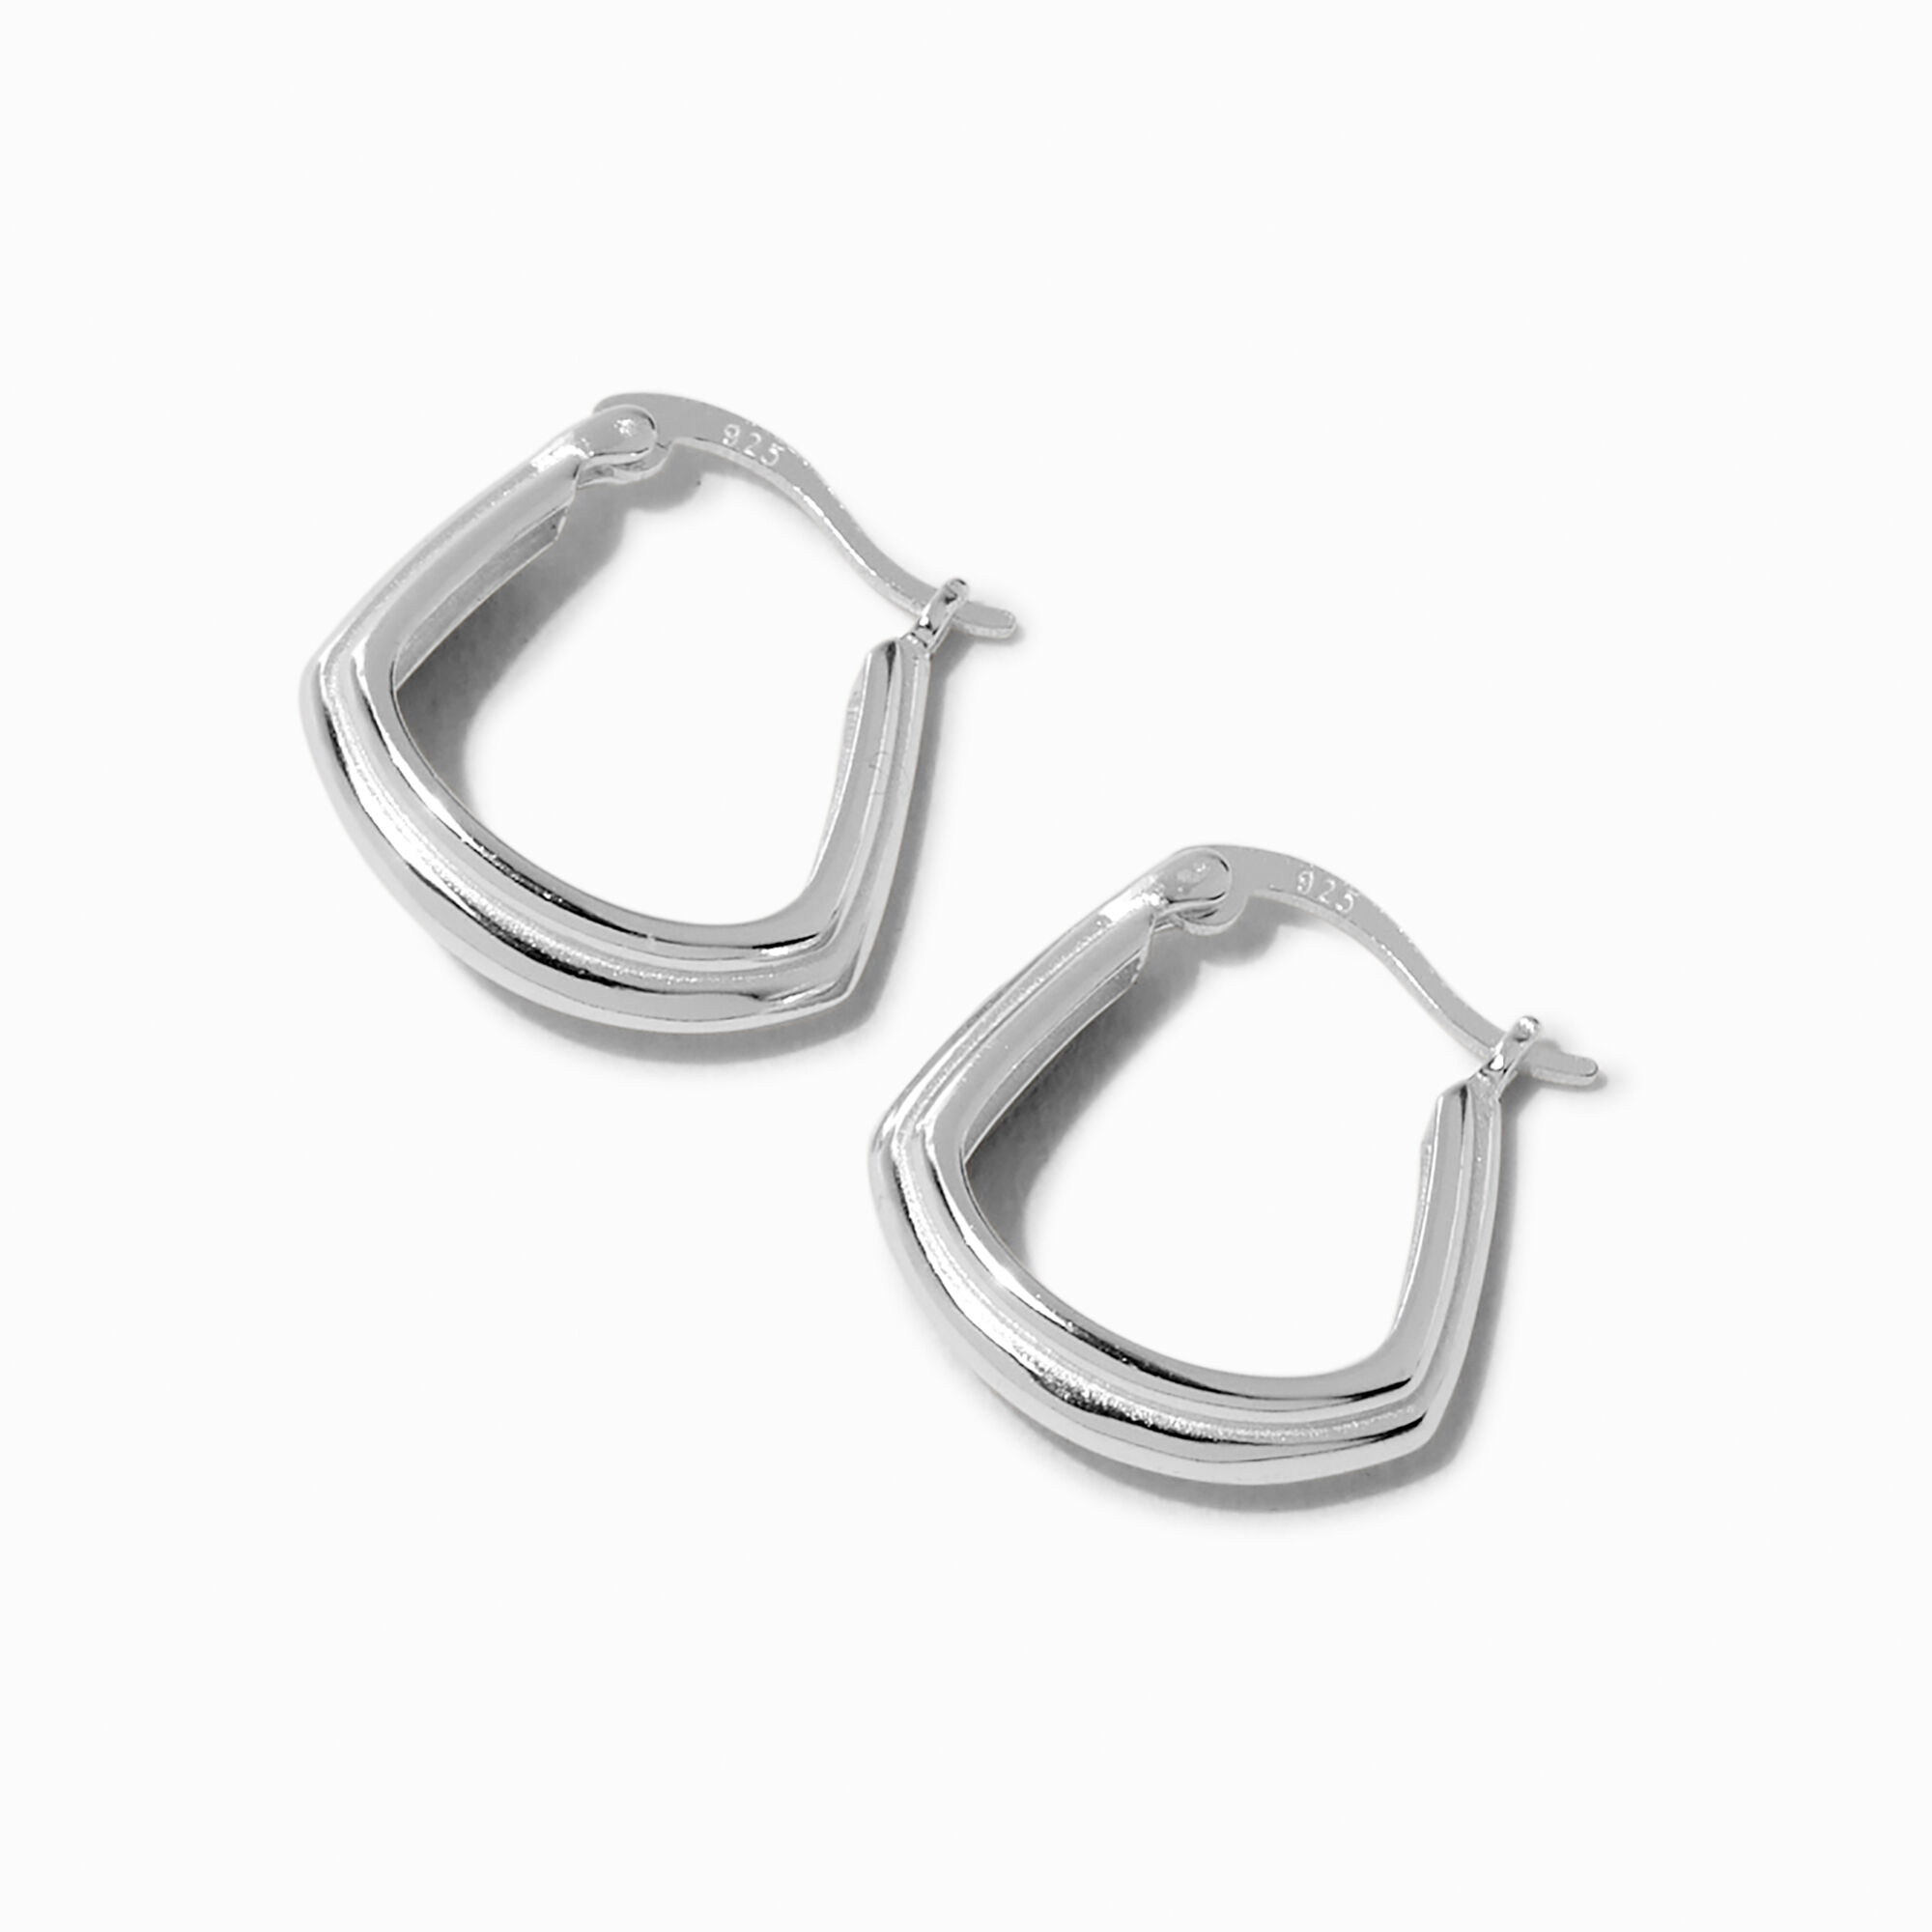 View C Luxe By Claires 14MM Fancy Hoop Earrings Silver information